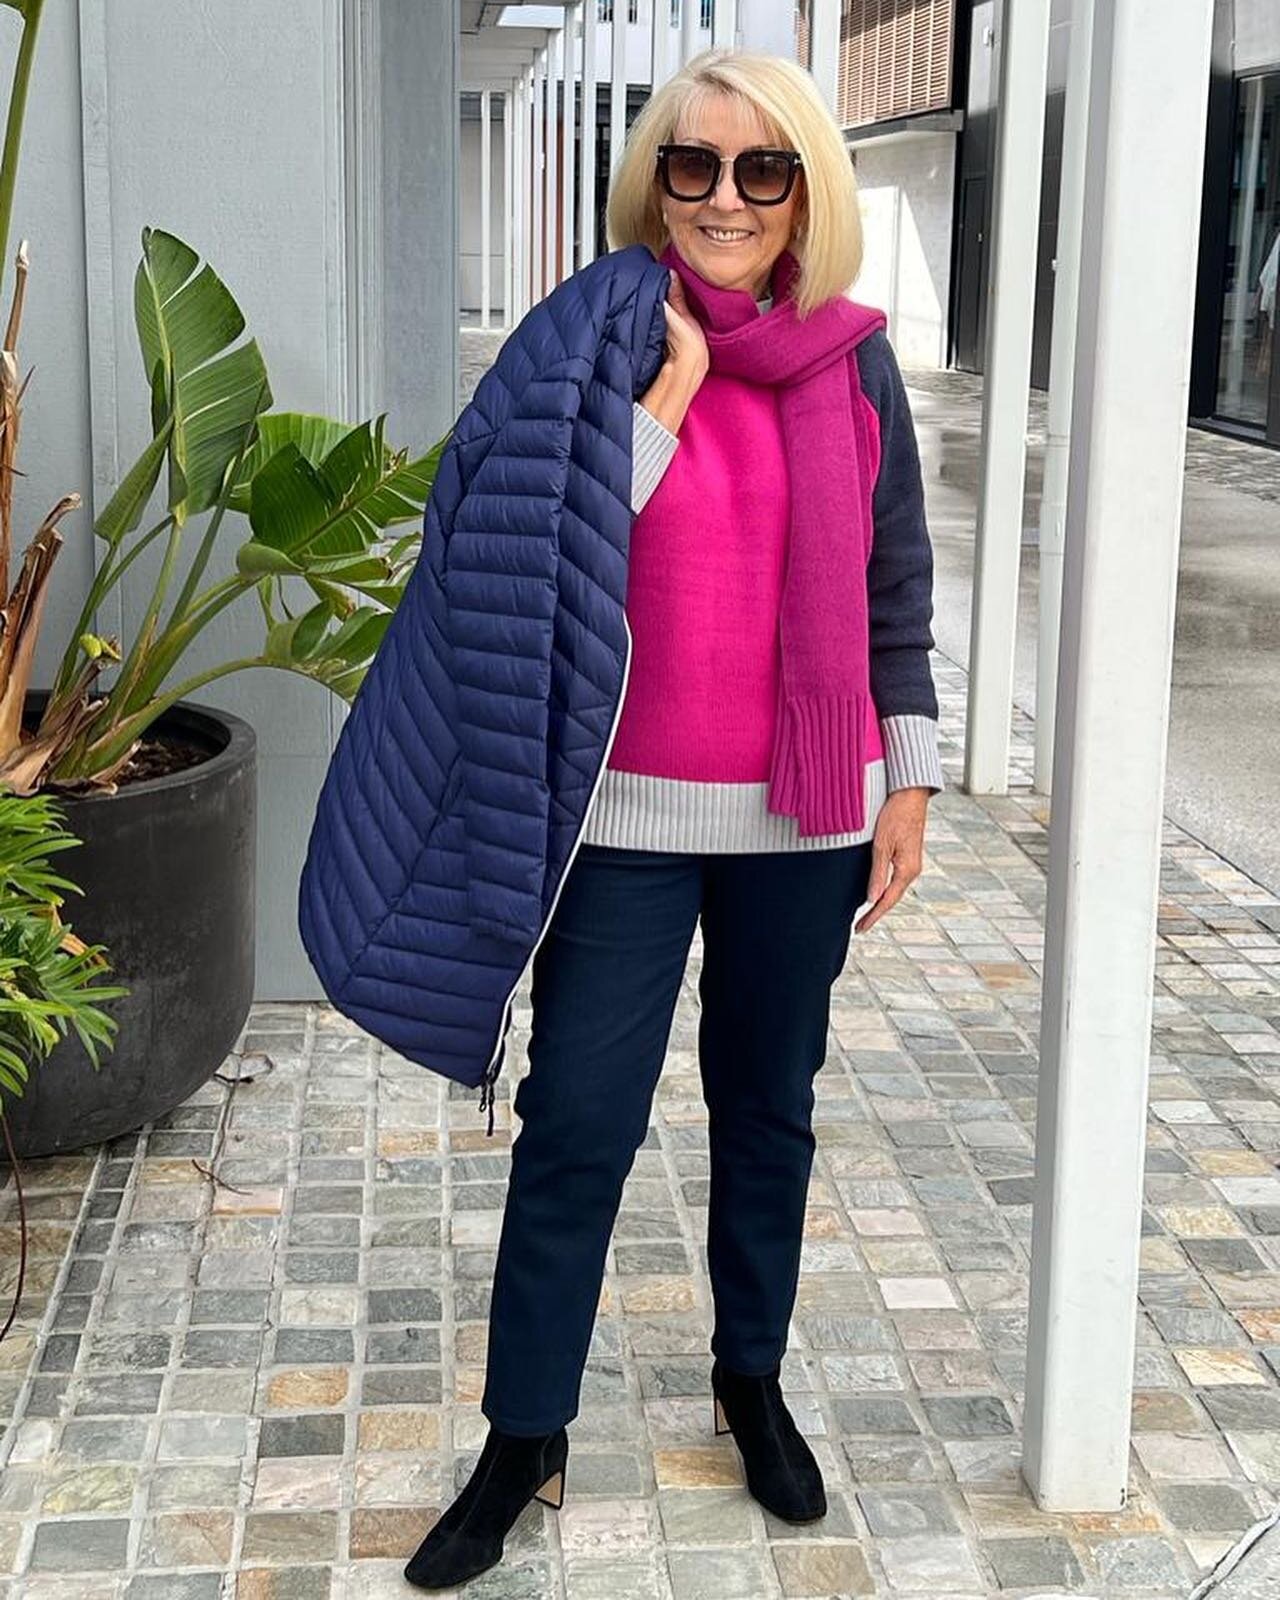 WARM WINTER LAYERS! 💞

We&rsquo;re keeping it cosy in new season KNITWEAR from @fella_hamilton
Soft and luxurious KNITS combined with fabulous WINTER LAYERS such as this cosy Down Jacket, Scarf and Beanie will have you feeling stylish all through th